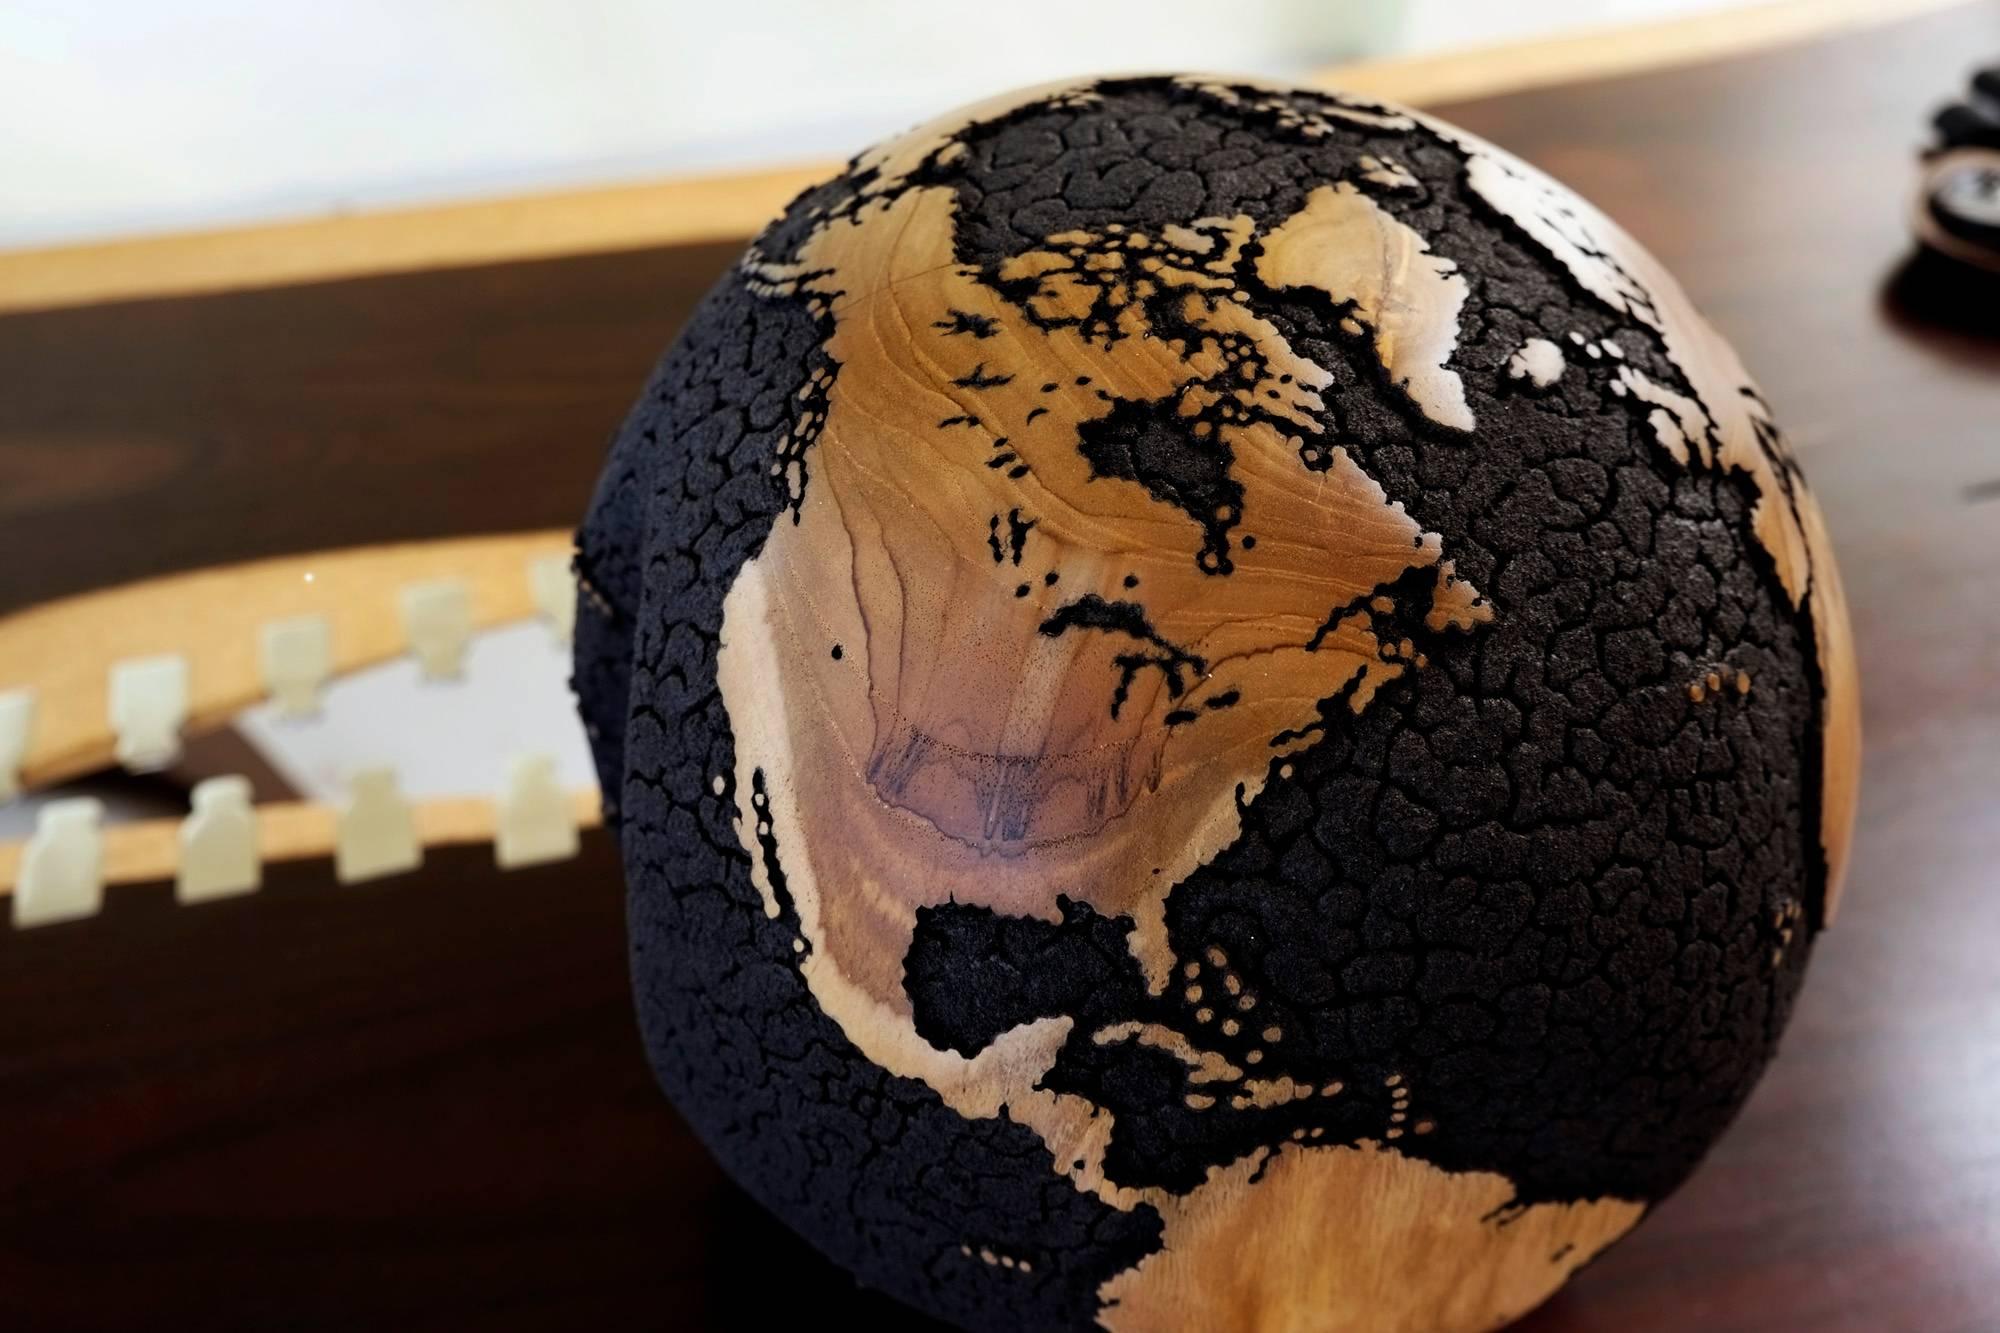 Hand-Carved Oceans Cracked Wooden Globe